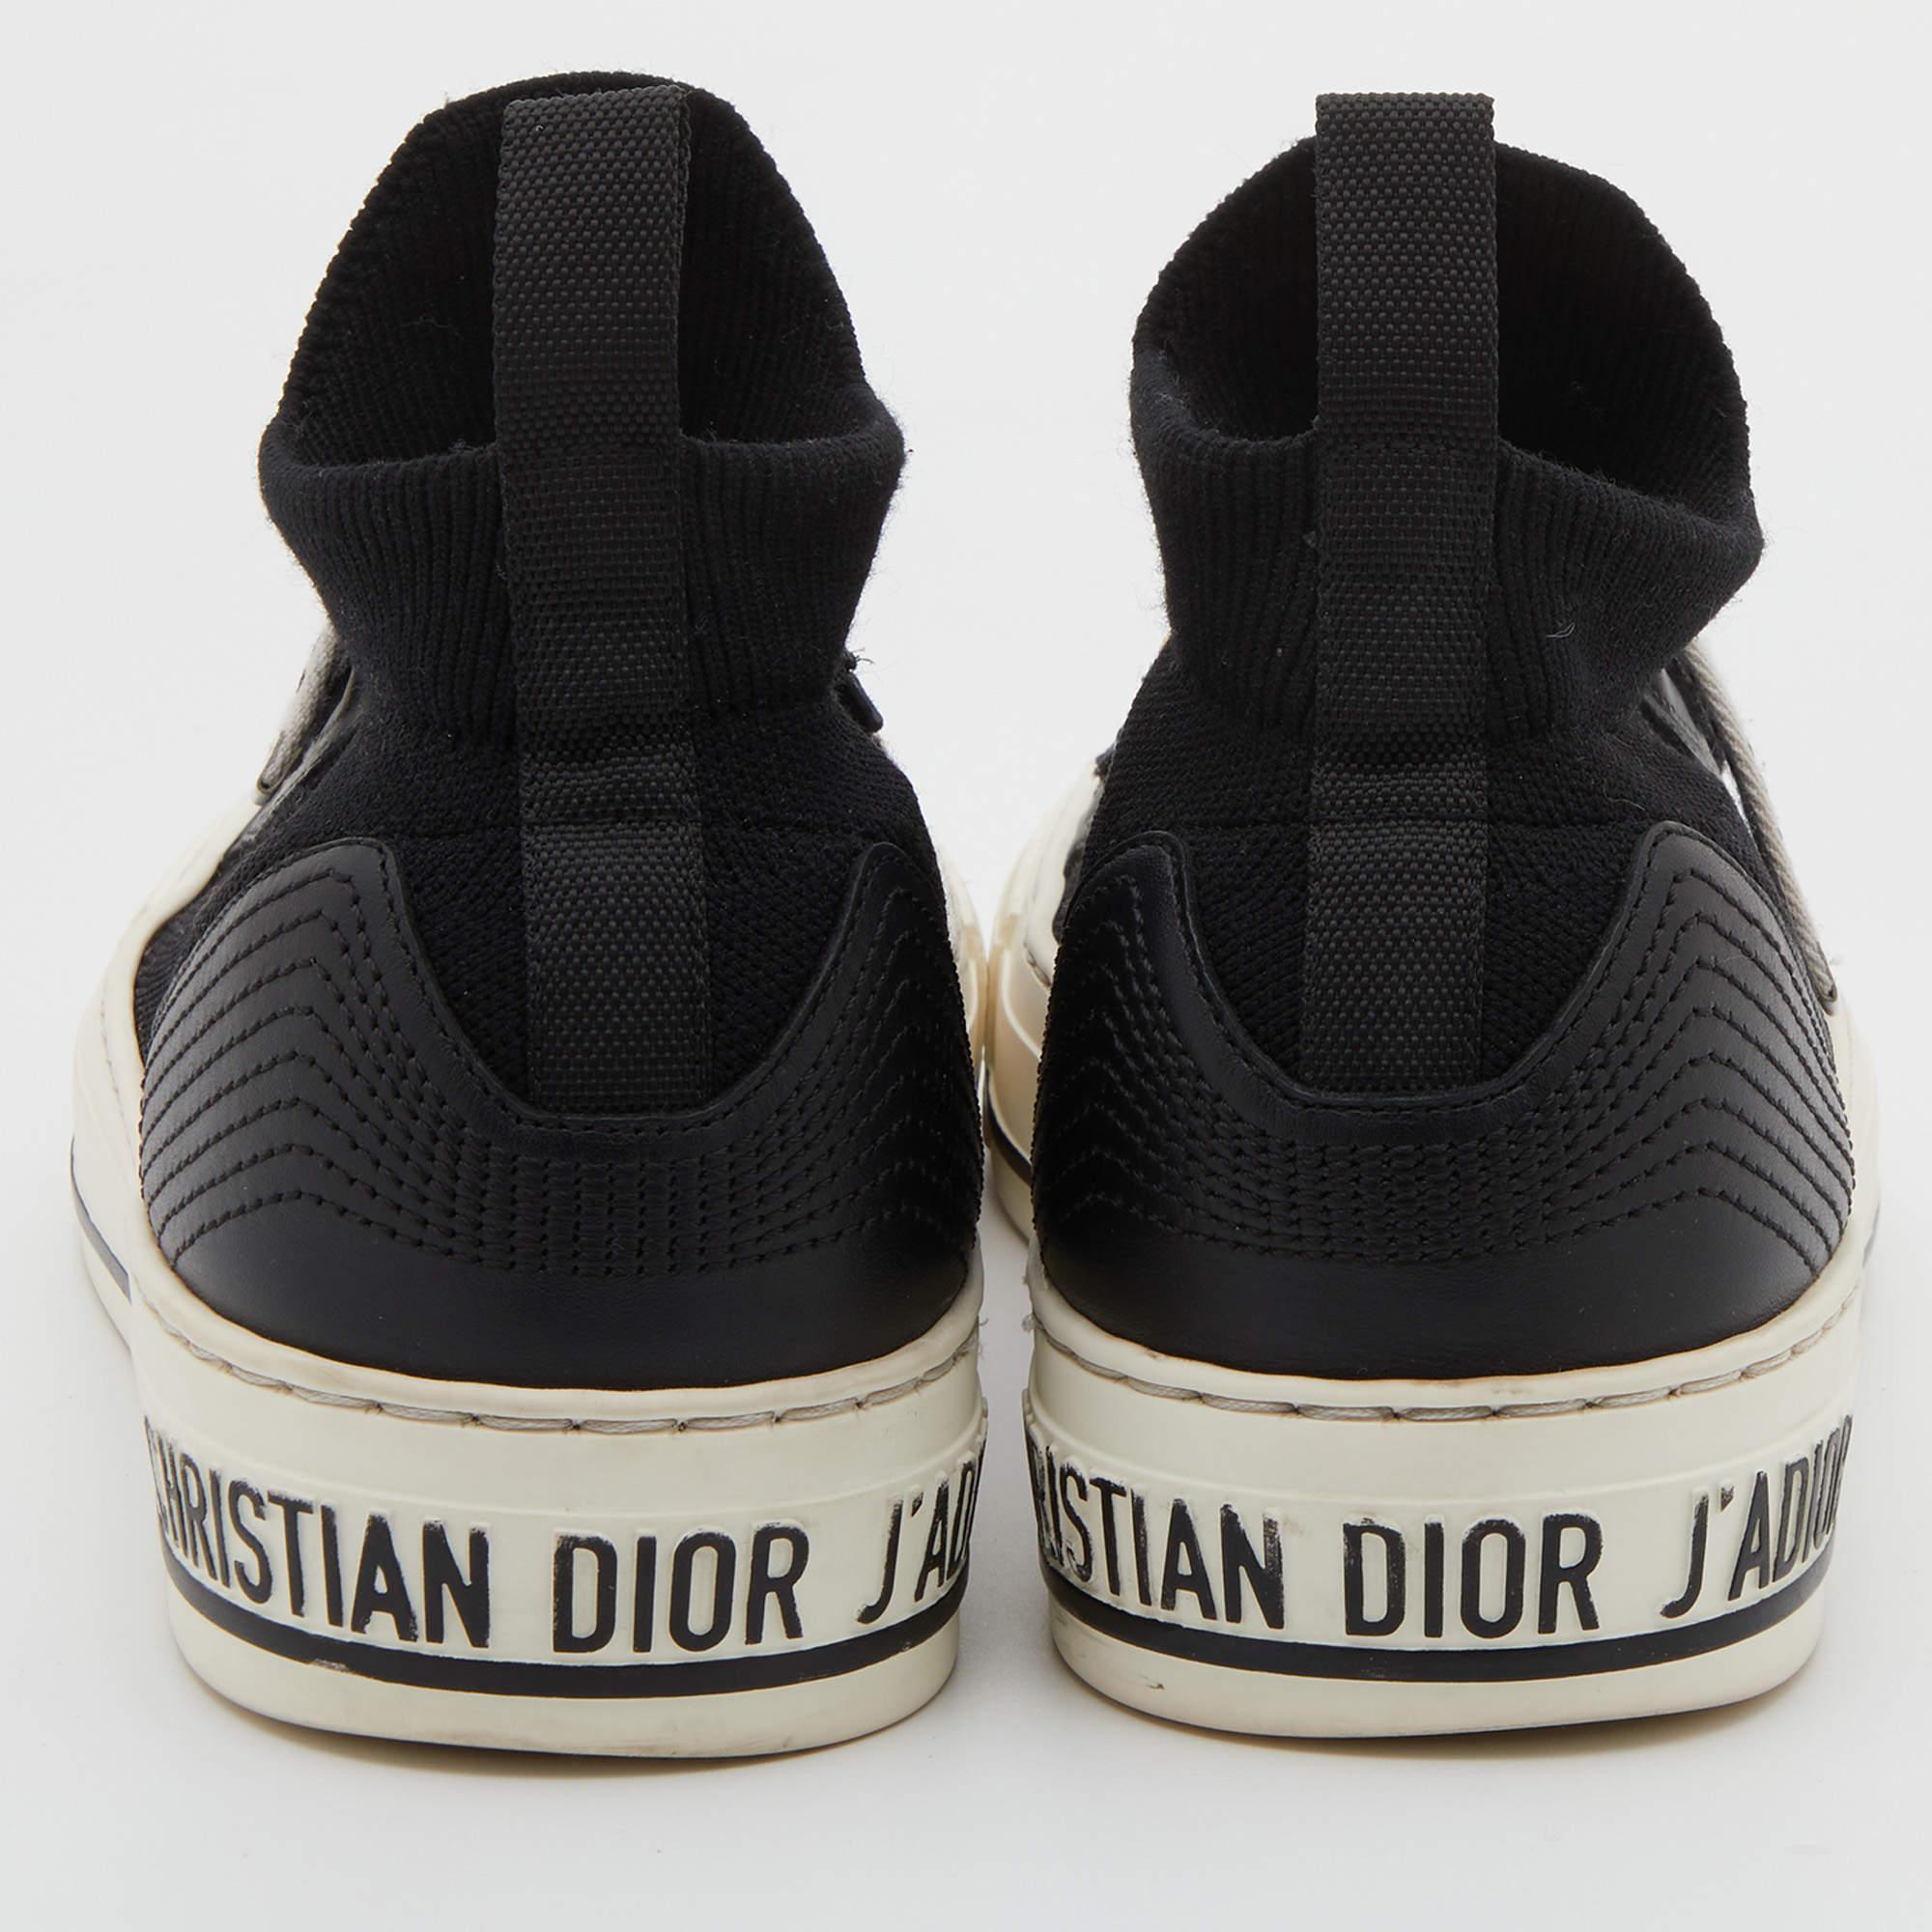 Dior Black/White Technical Knit and Leather Walk'n'Dior  Sneakers Size 36 4